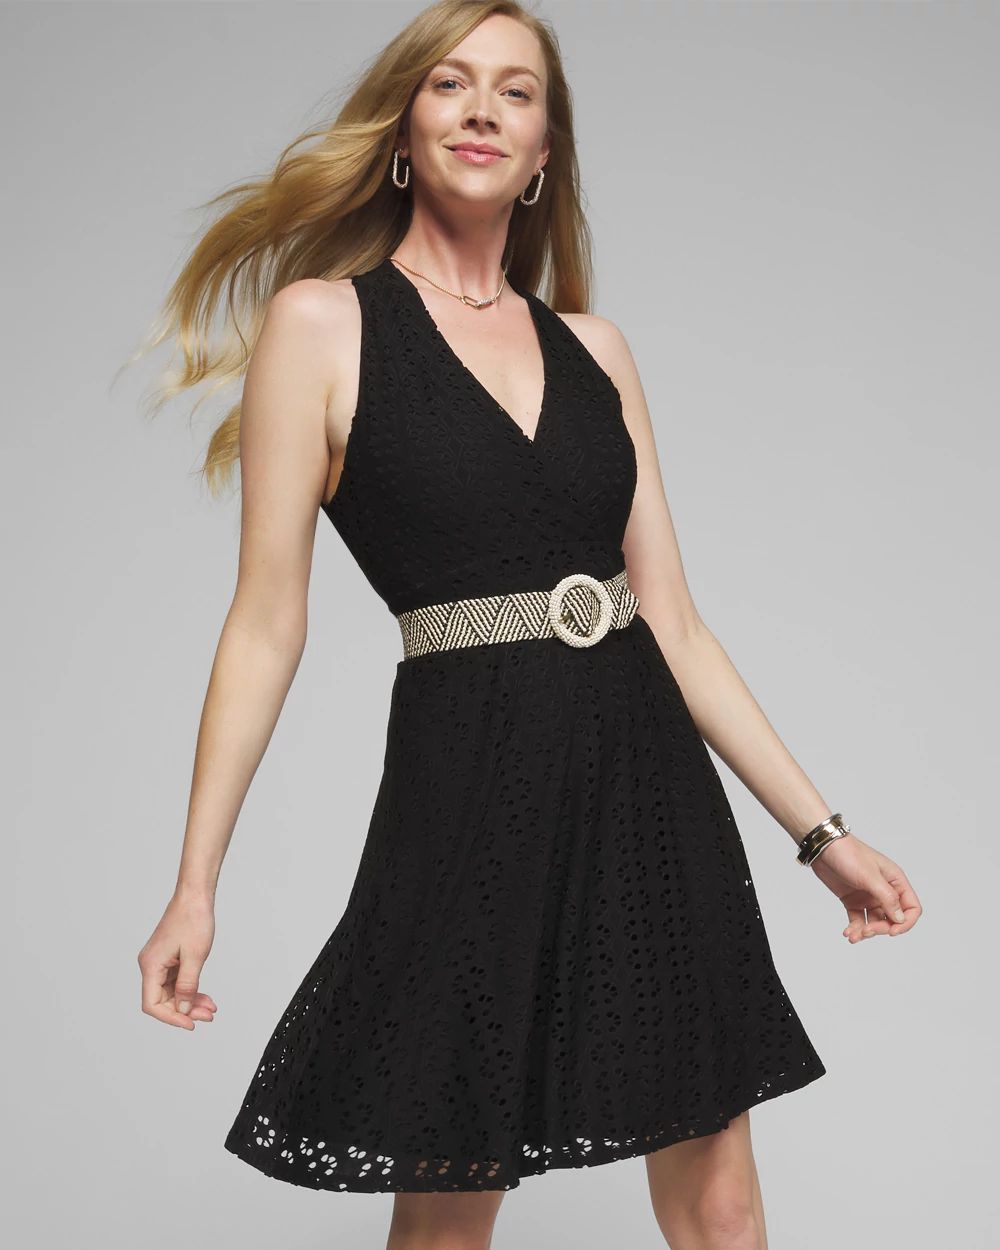 Outlet WHBM Eyelet Halter Dress click to view larger image.